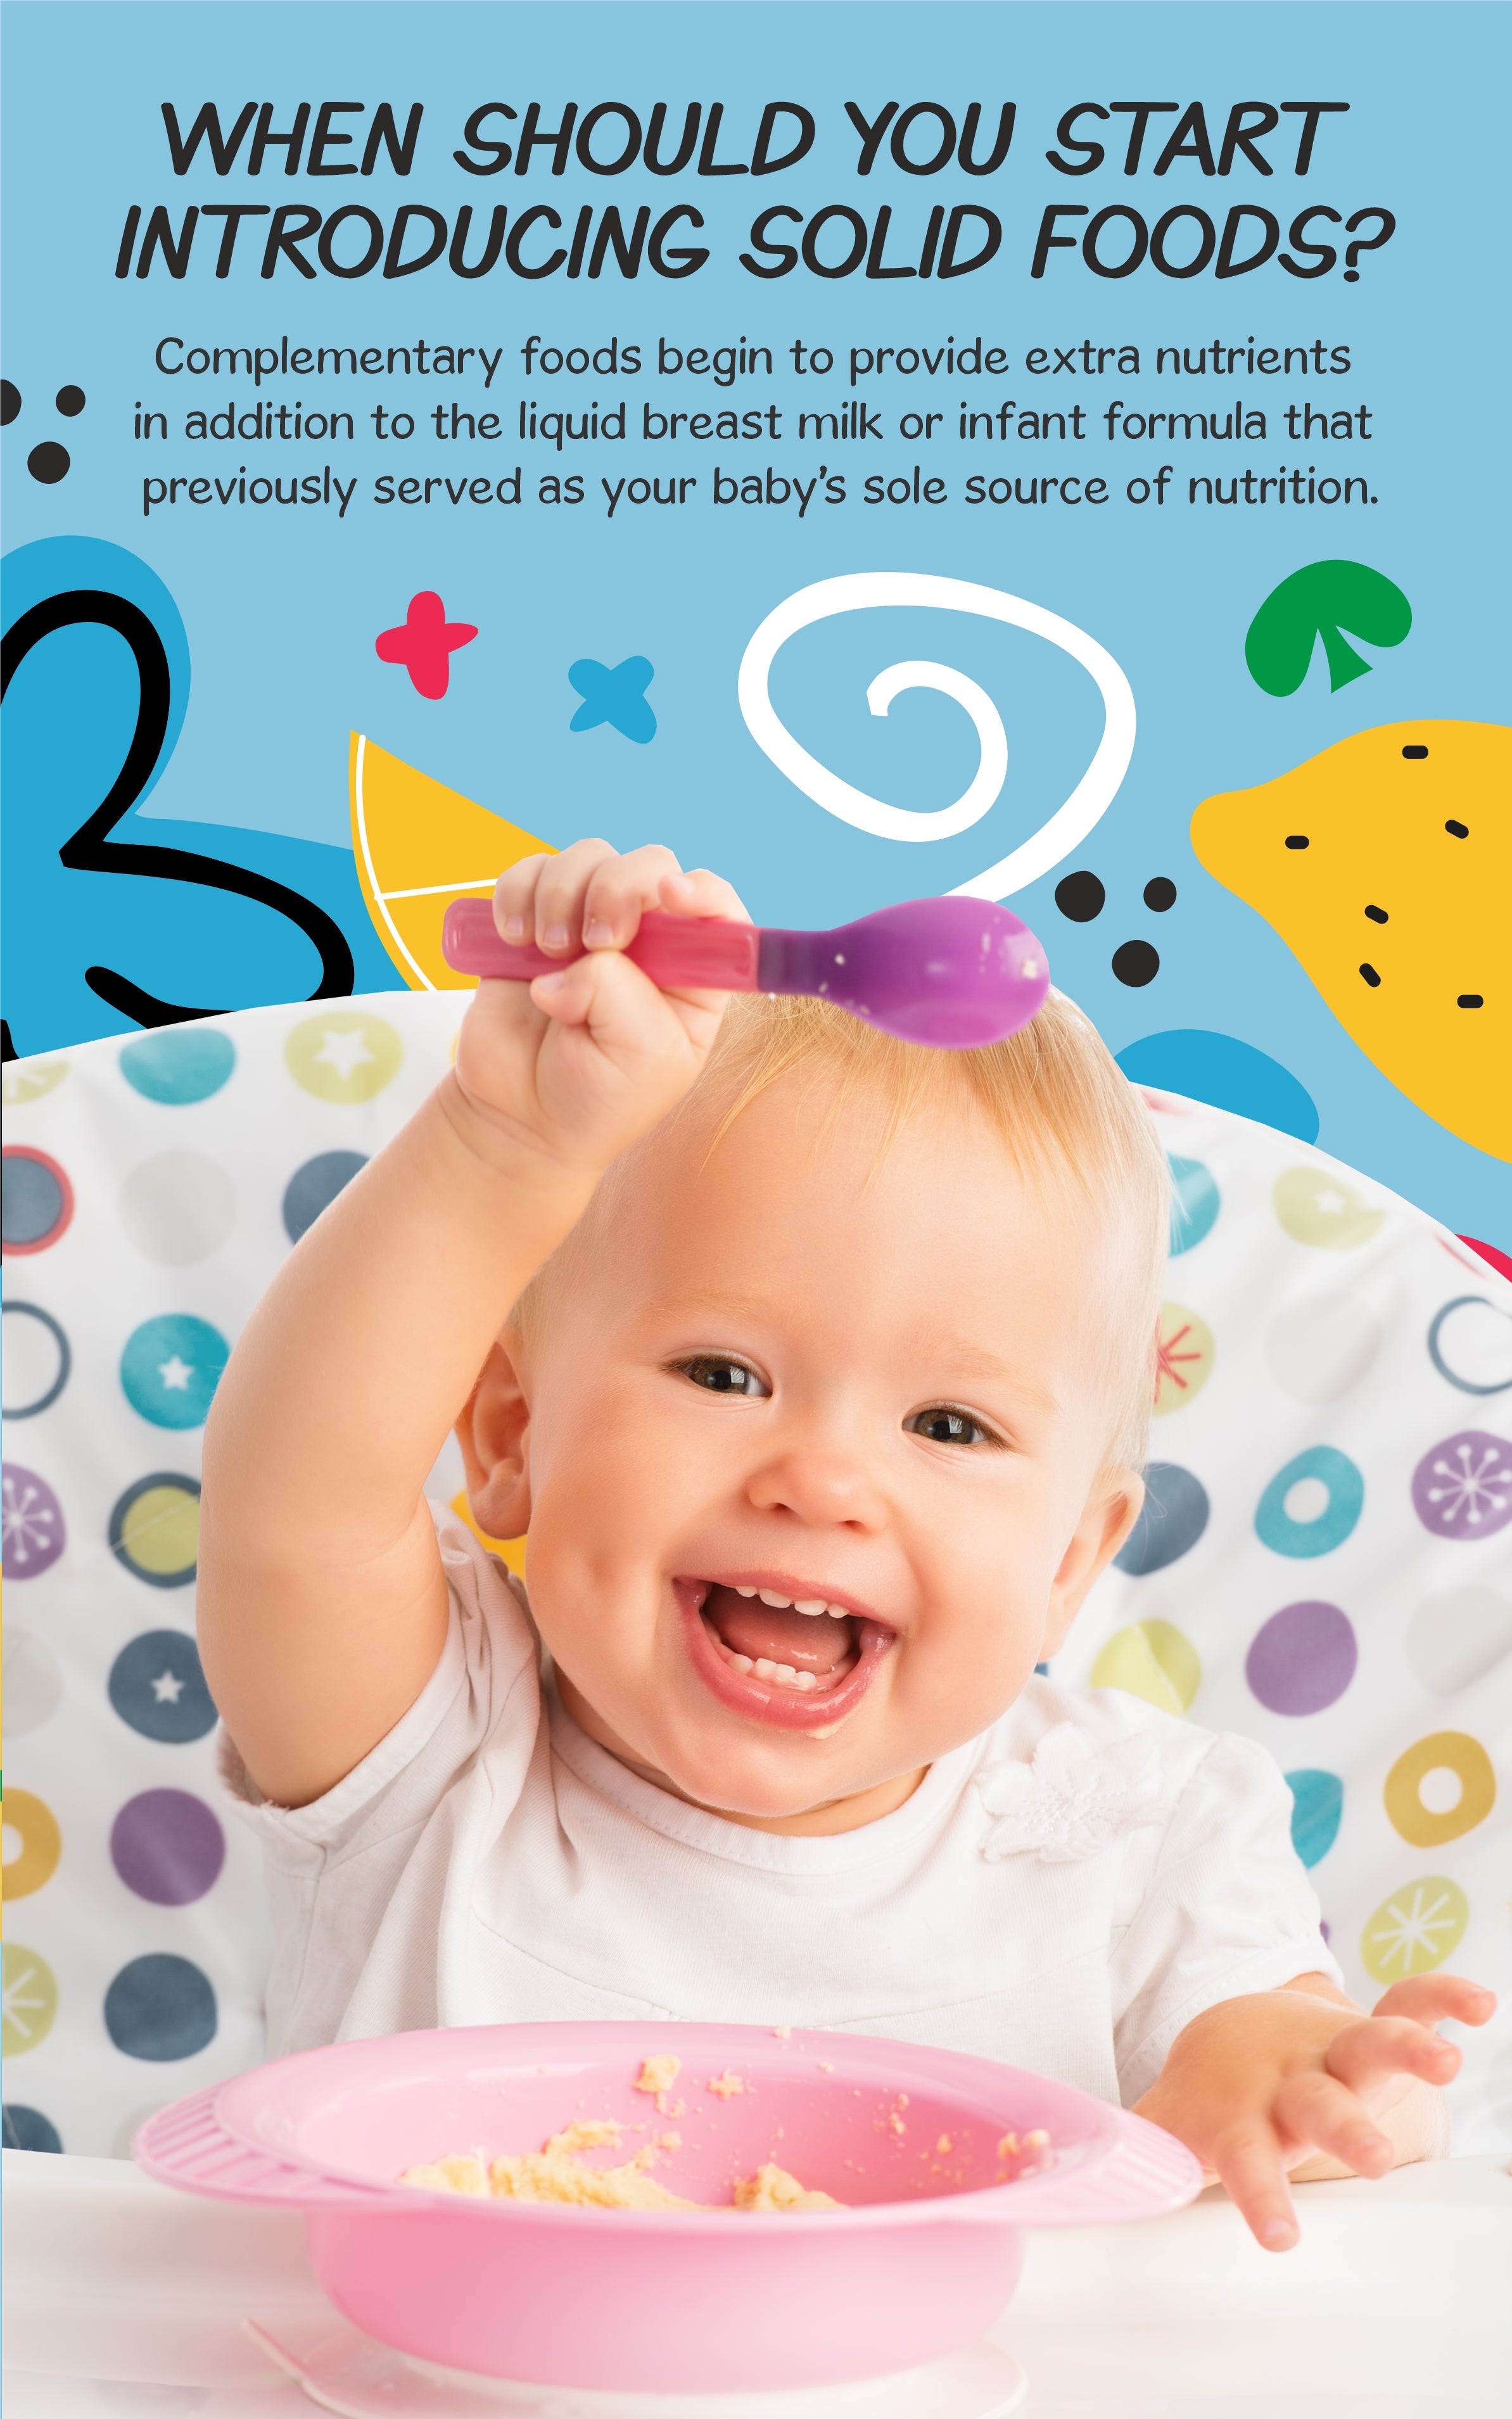 Baby Food Options To Introduce to Your Child